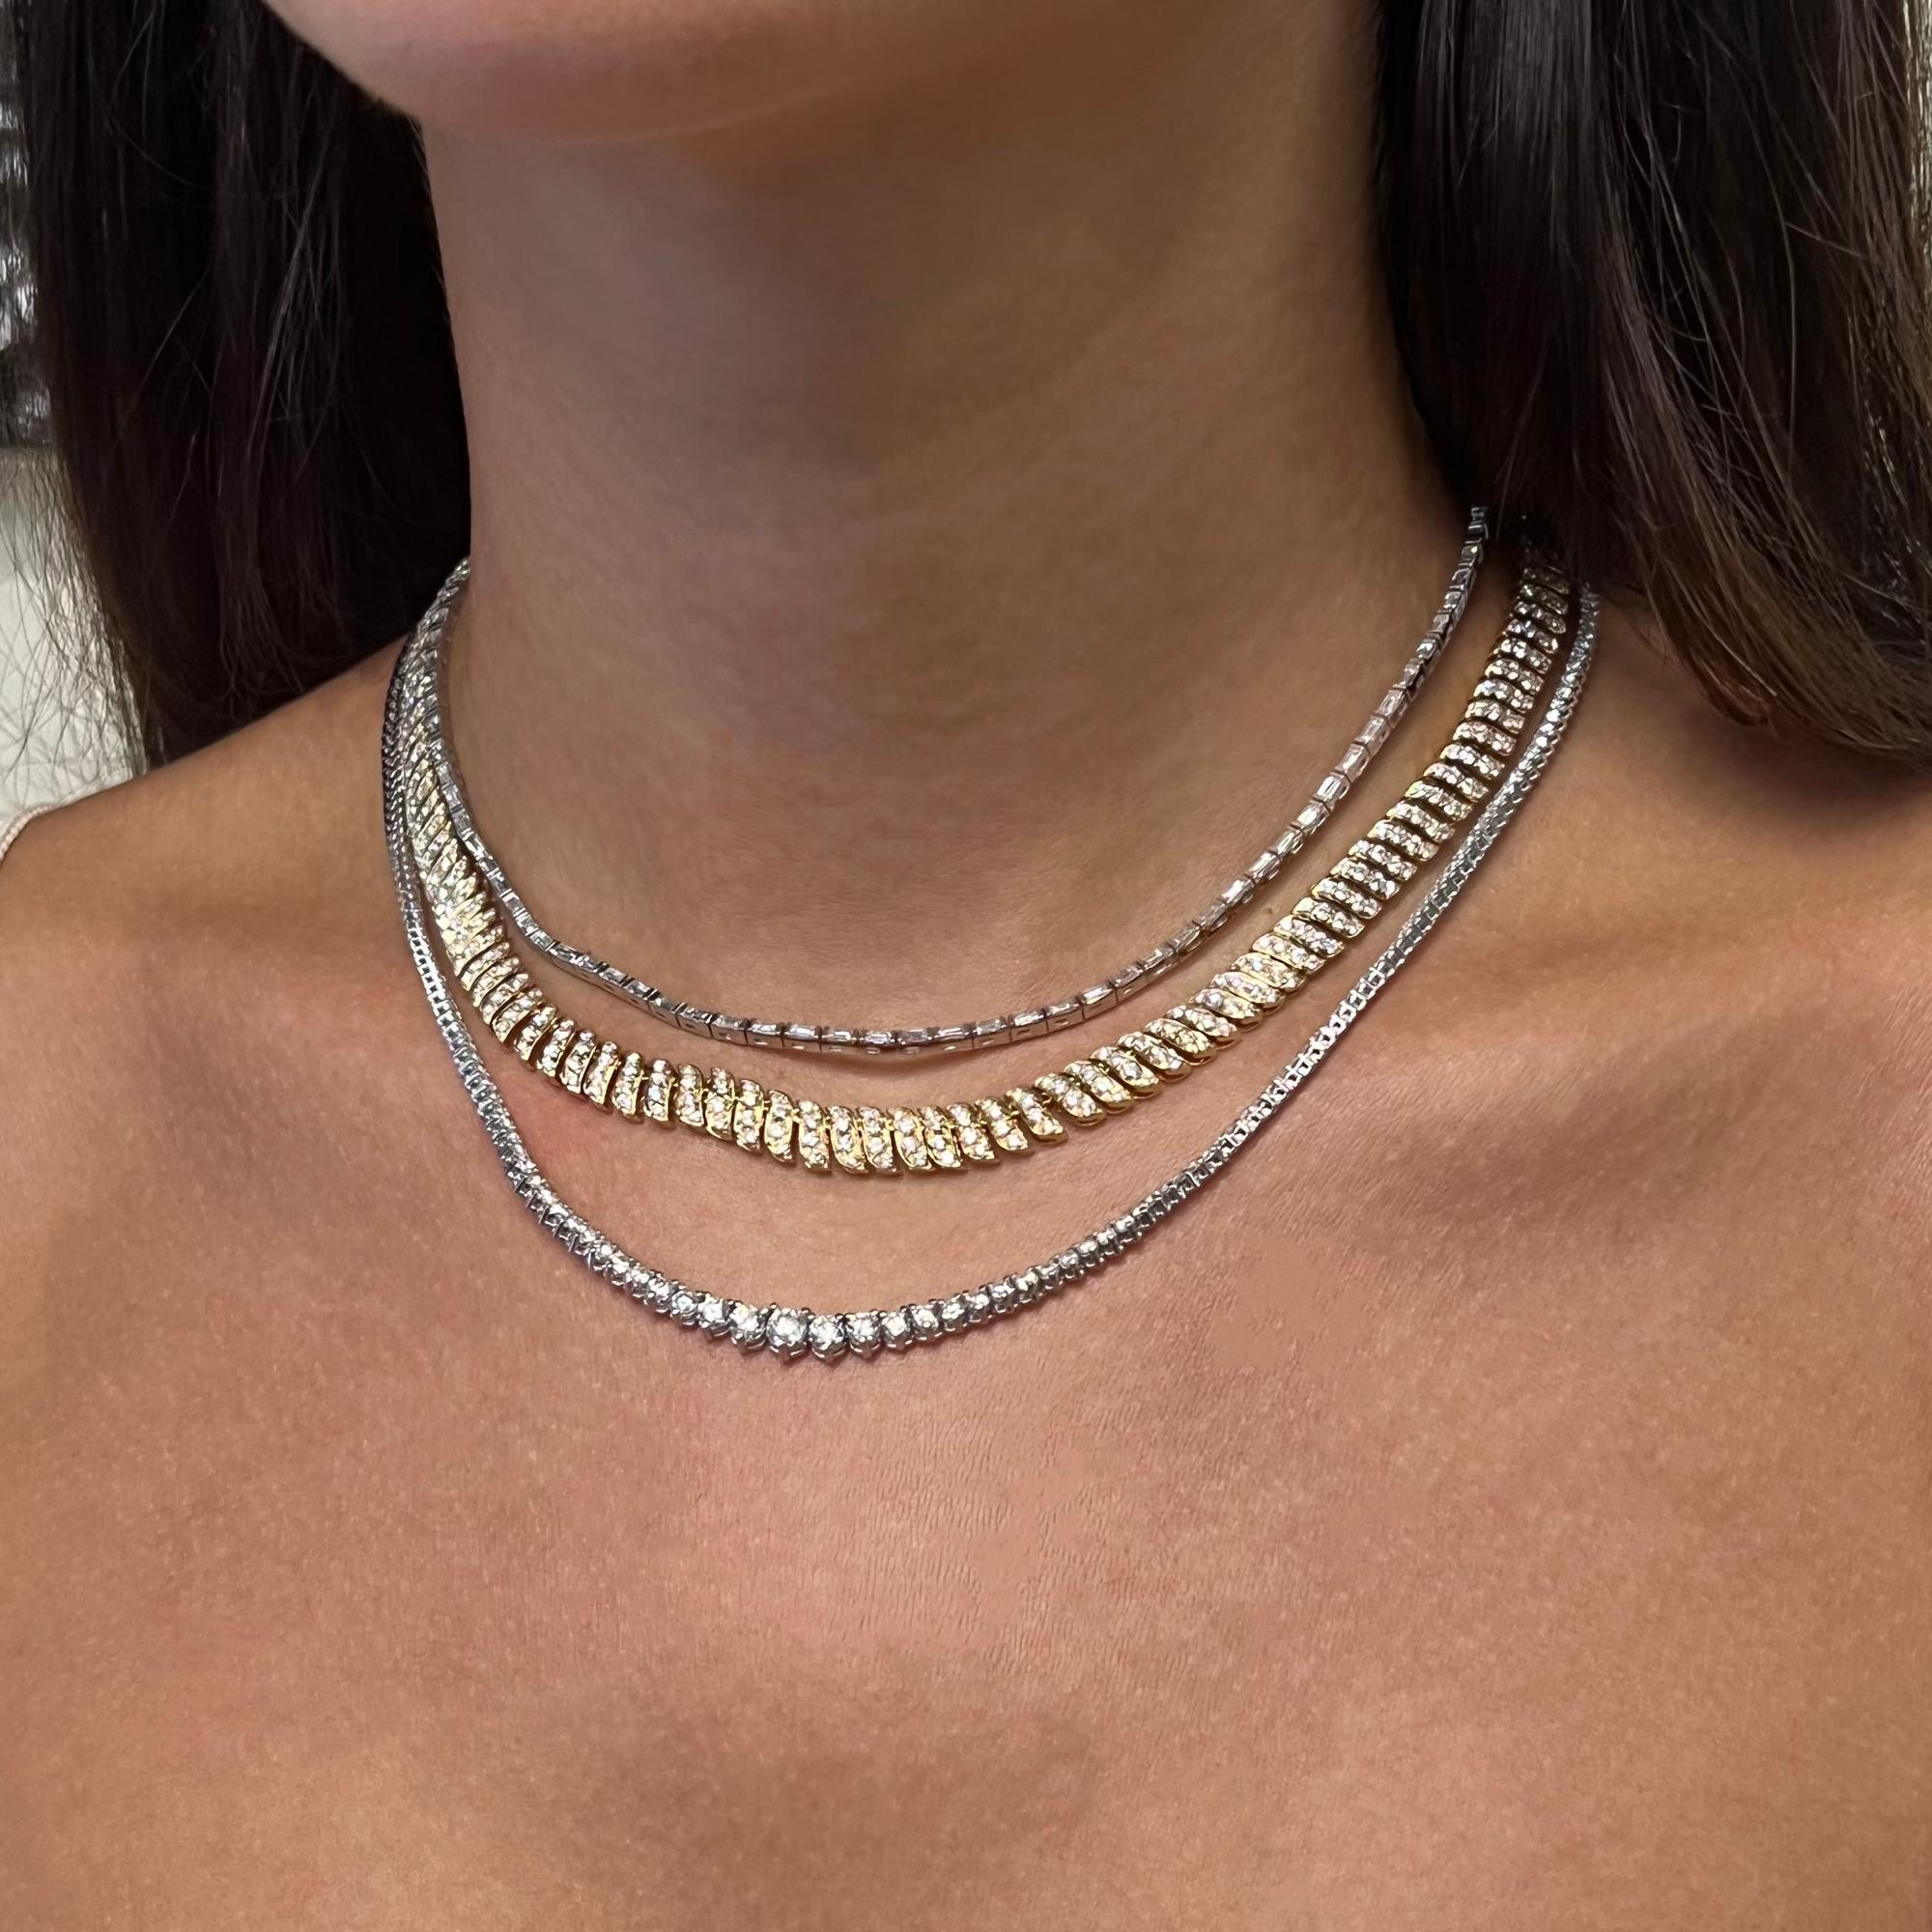 4.60cttw Baguette Cut Diamond Tennis Statement Necklace 18K White Gold In New Condition For Sale In New York, NY